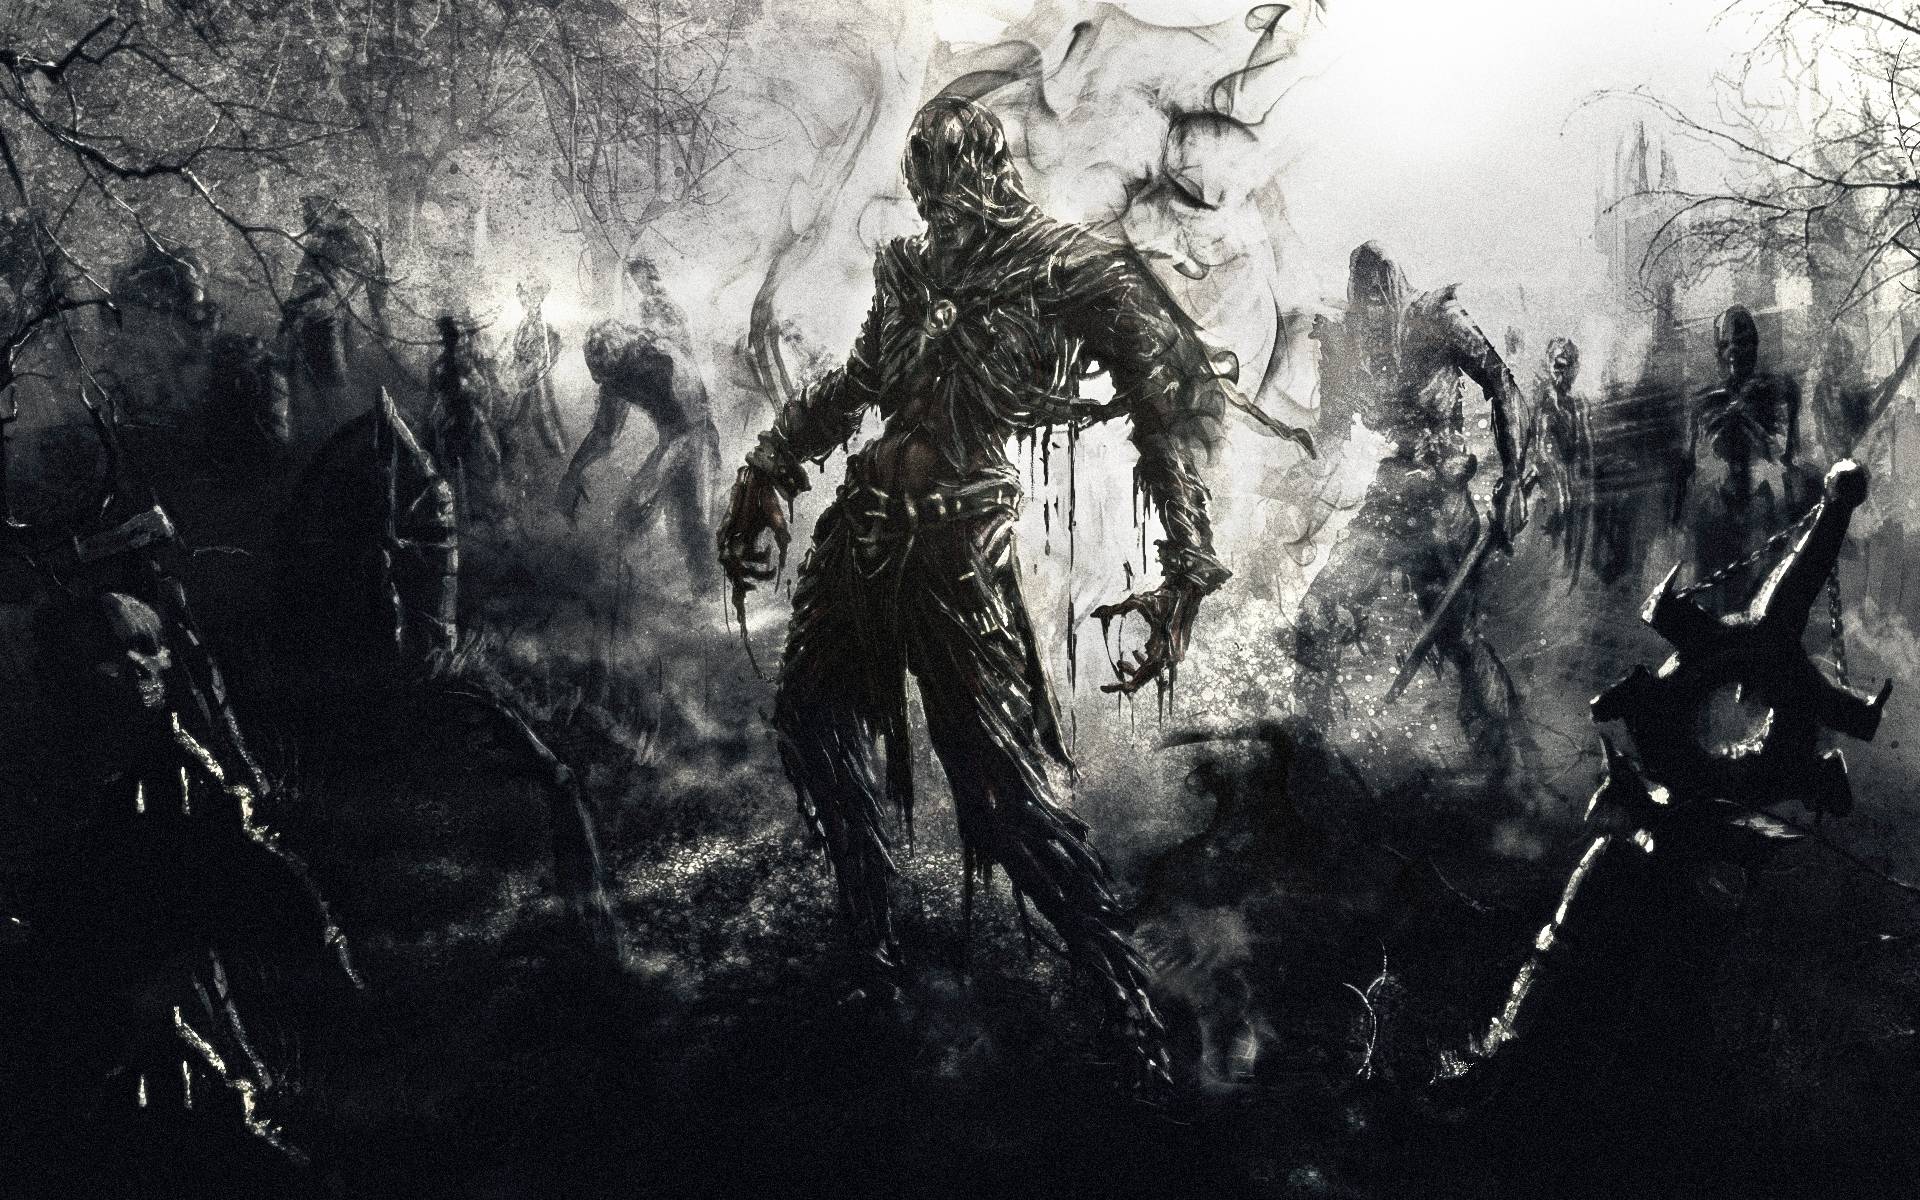 Wallpaper For > Black Ops 2 Zombies Wallpaper 1920x1080